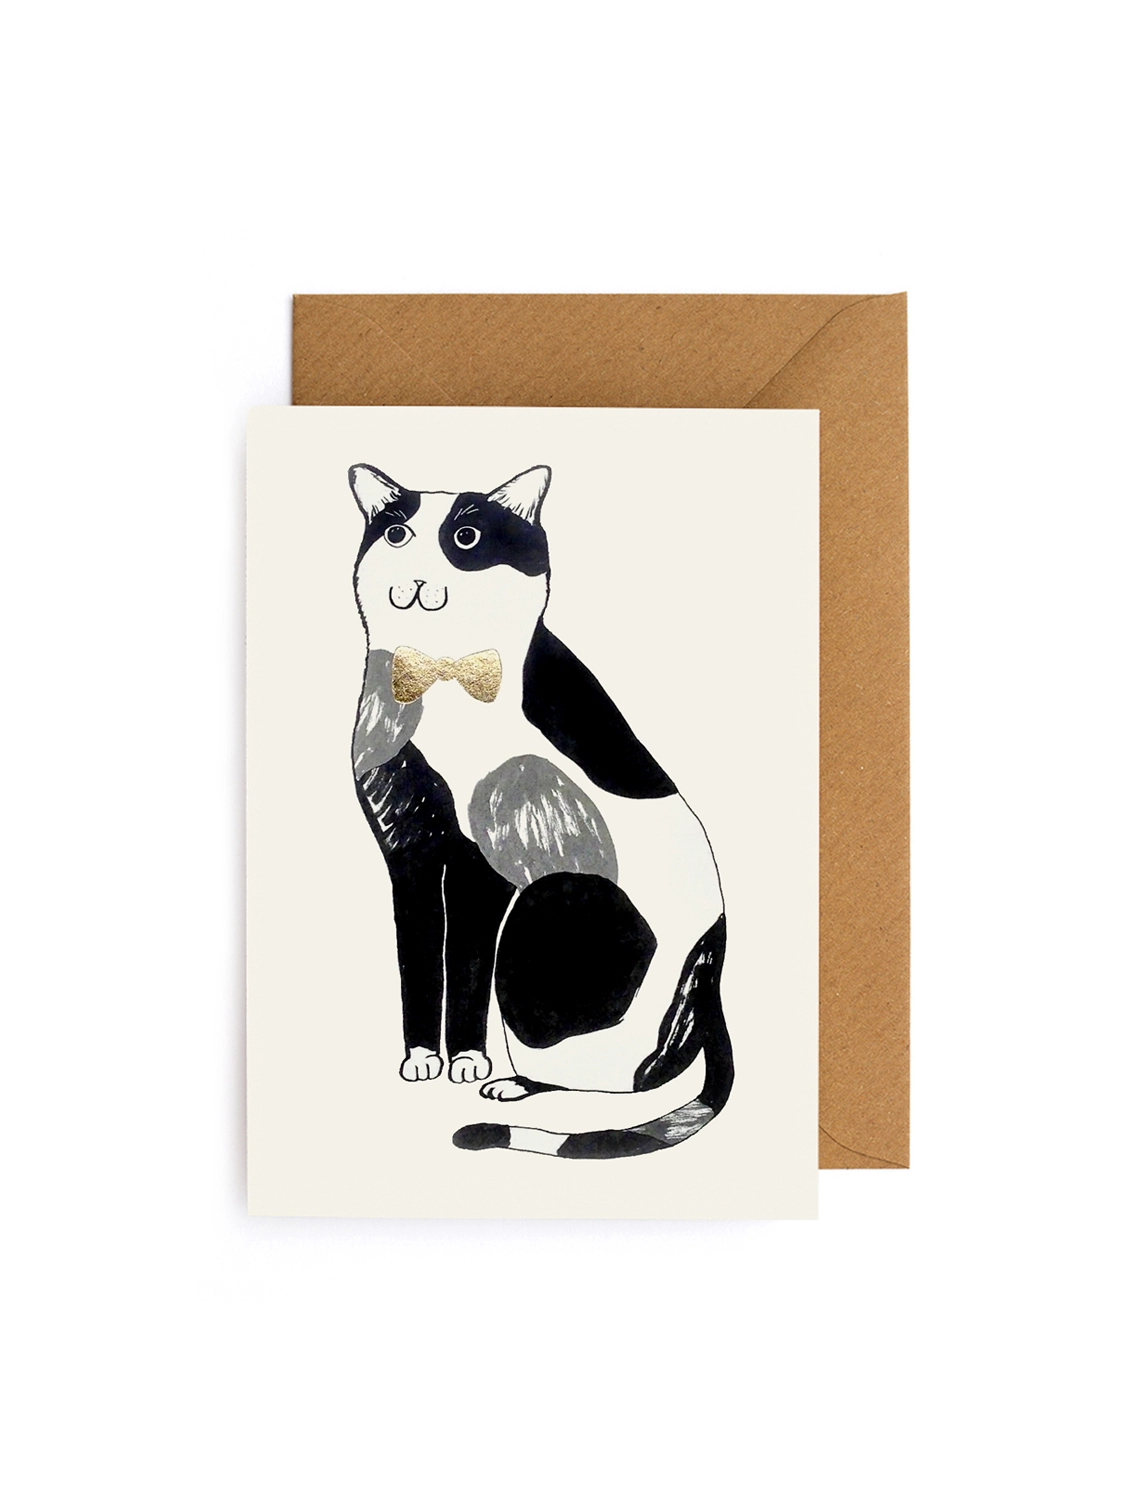 Greeting card featuring a calico cat wearing a gold bow tie